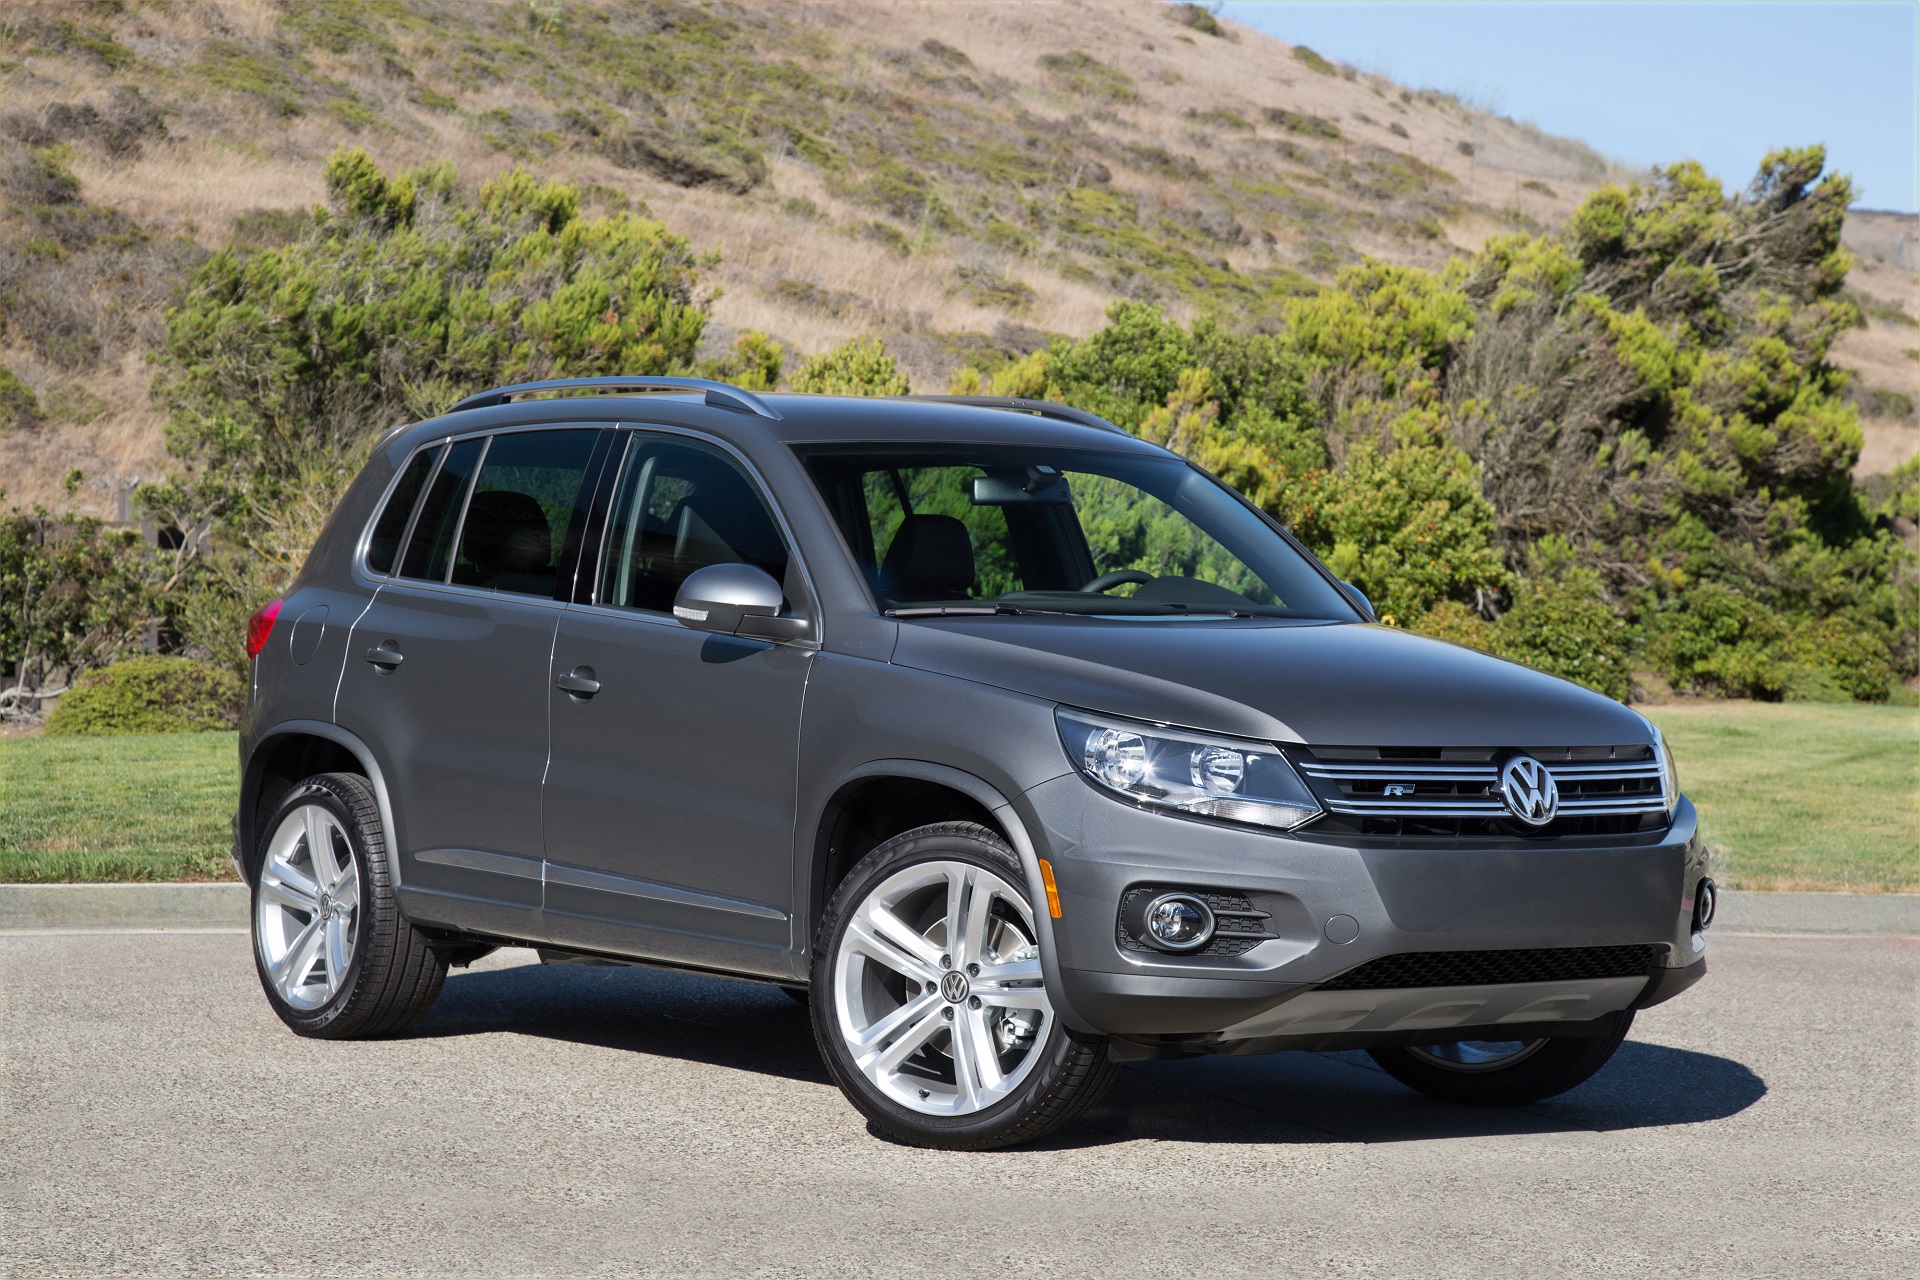 2017 Volkswagen Tiguan (VW) Review, Ratings, Specs, Prices, and Photos -  The Car Connection